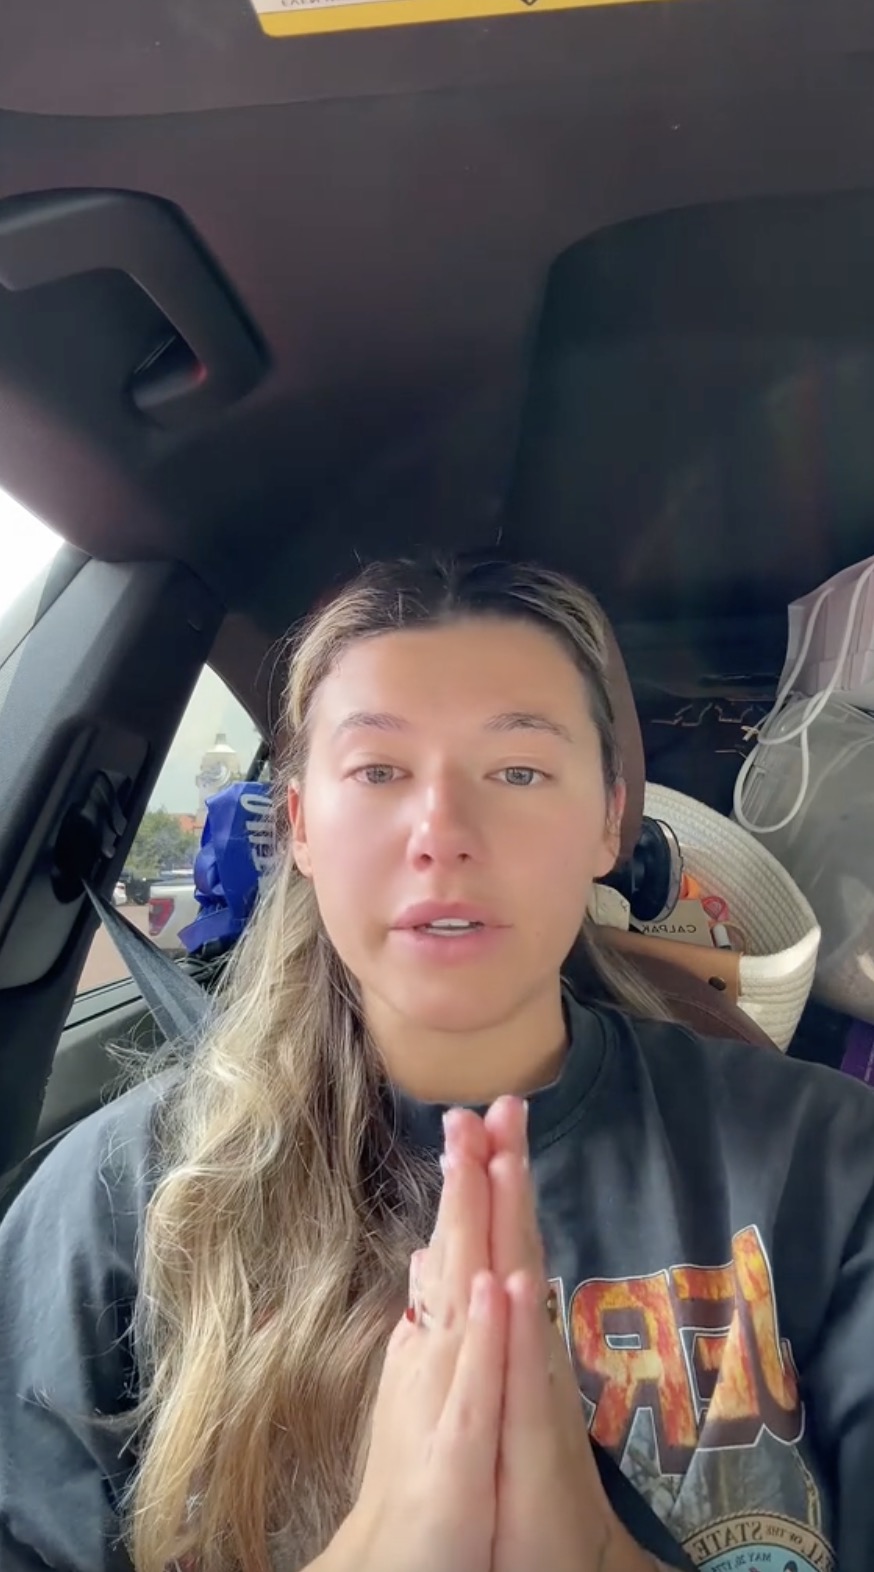 Robillard revealed the news in a TikTok clip while she was sitting in a car with her belongings